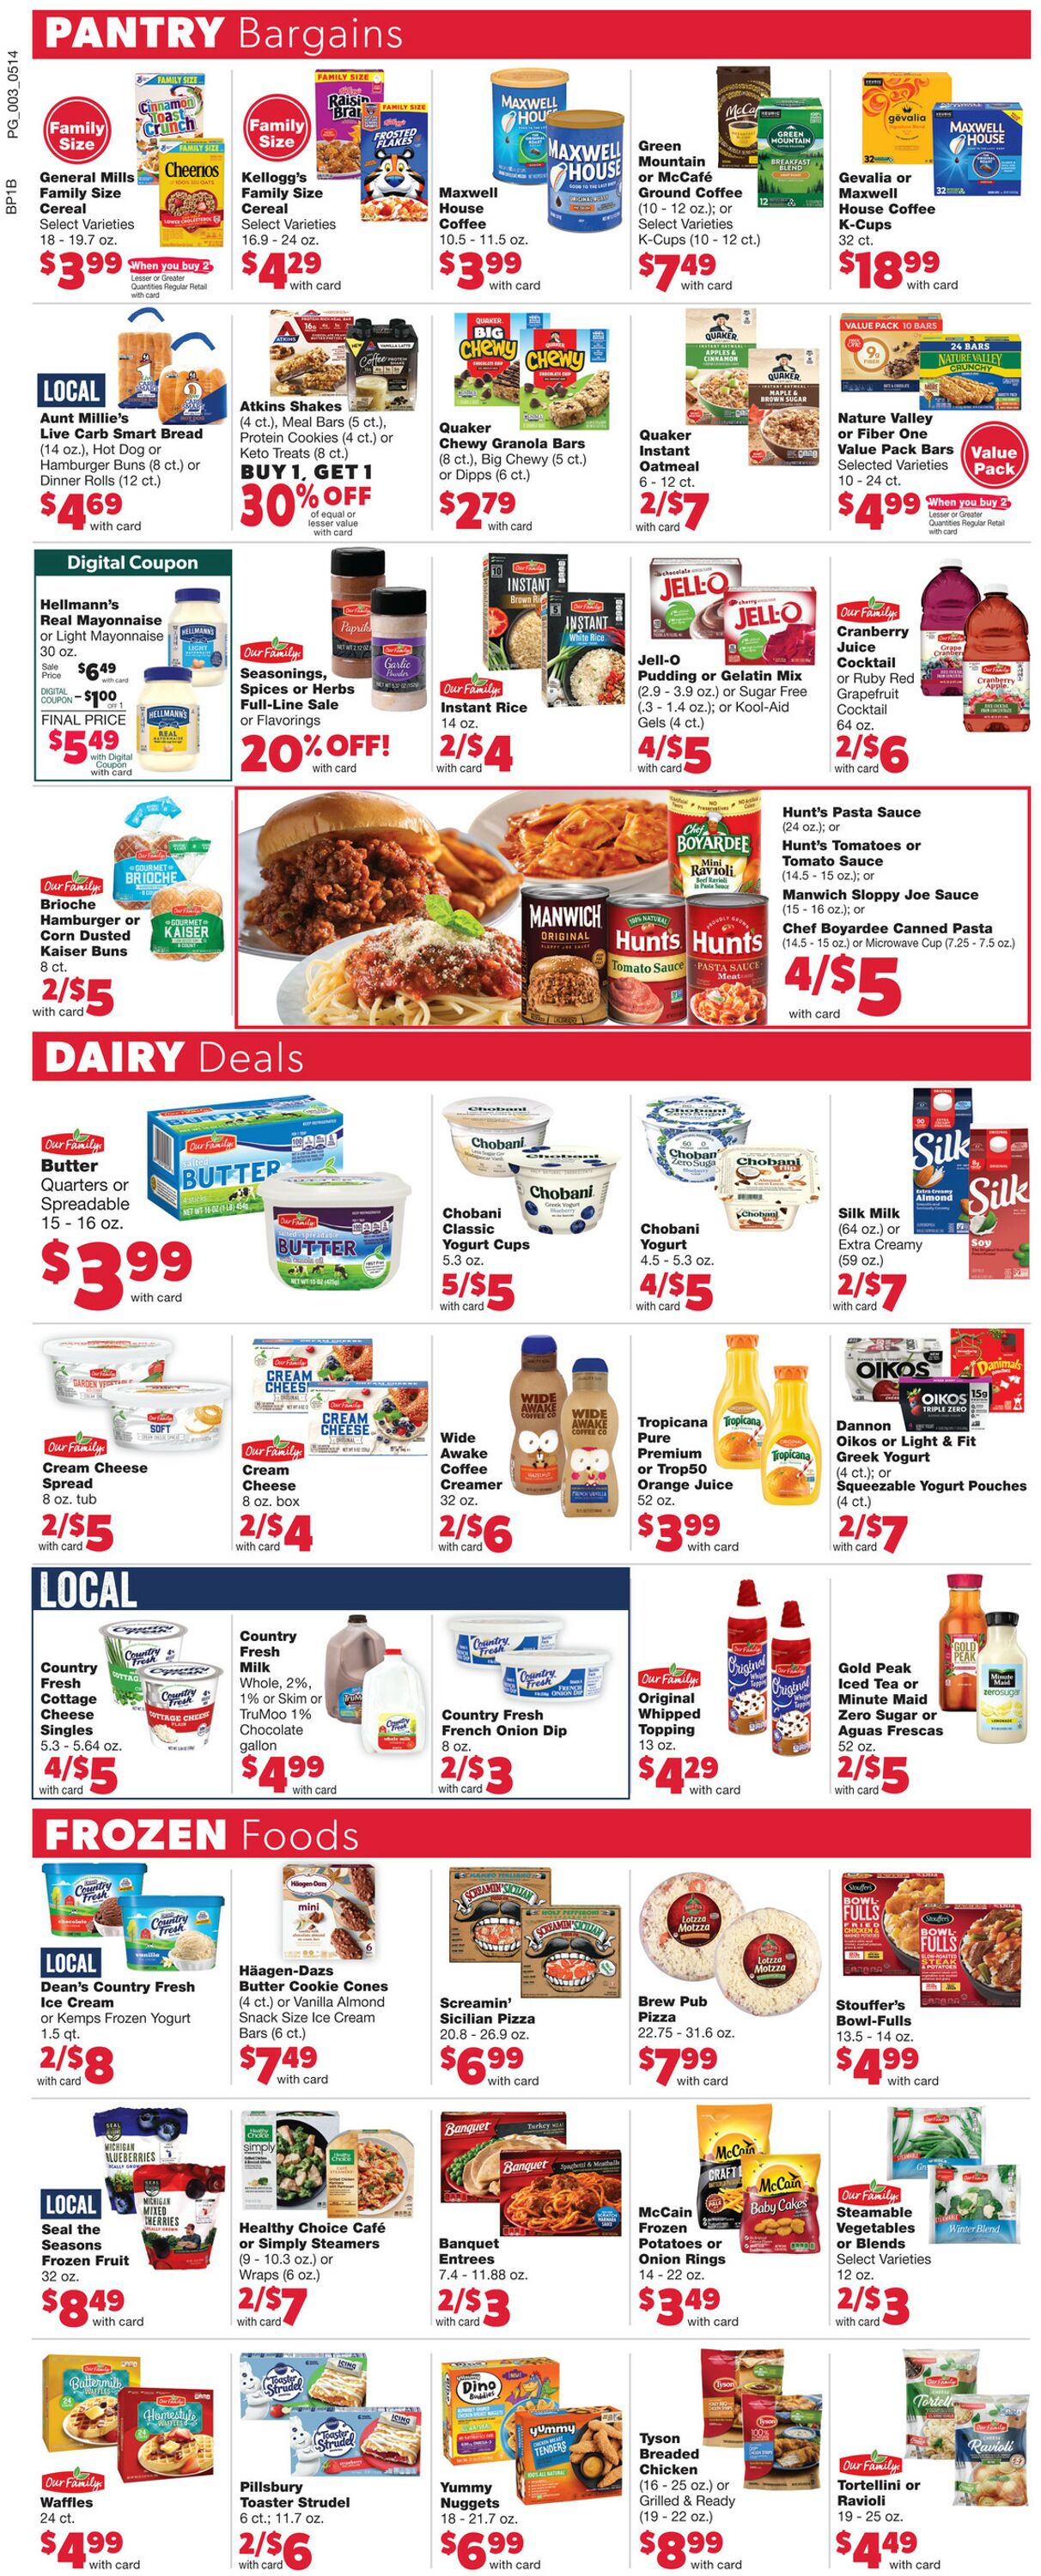 Weekly ad Family Fare 05/14/2023 - 05/20/2023